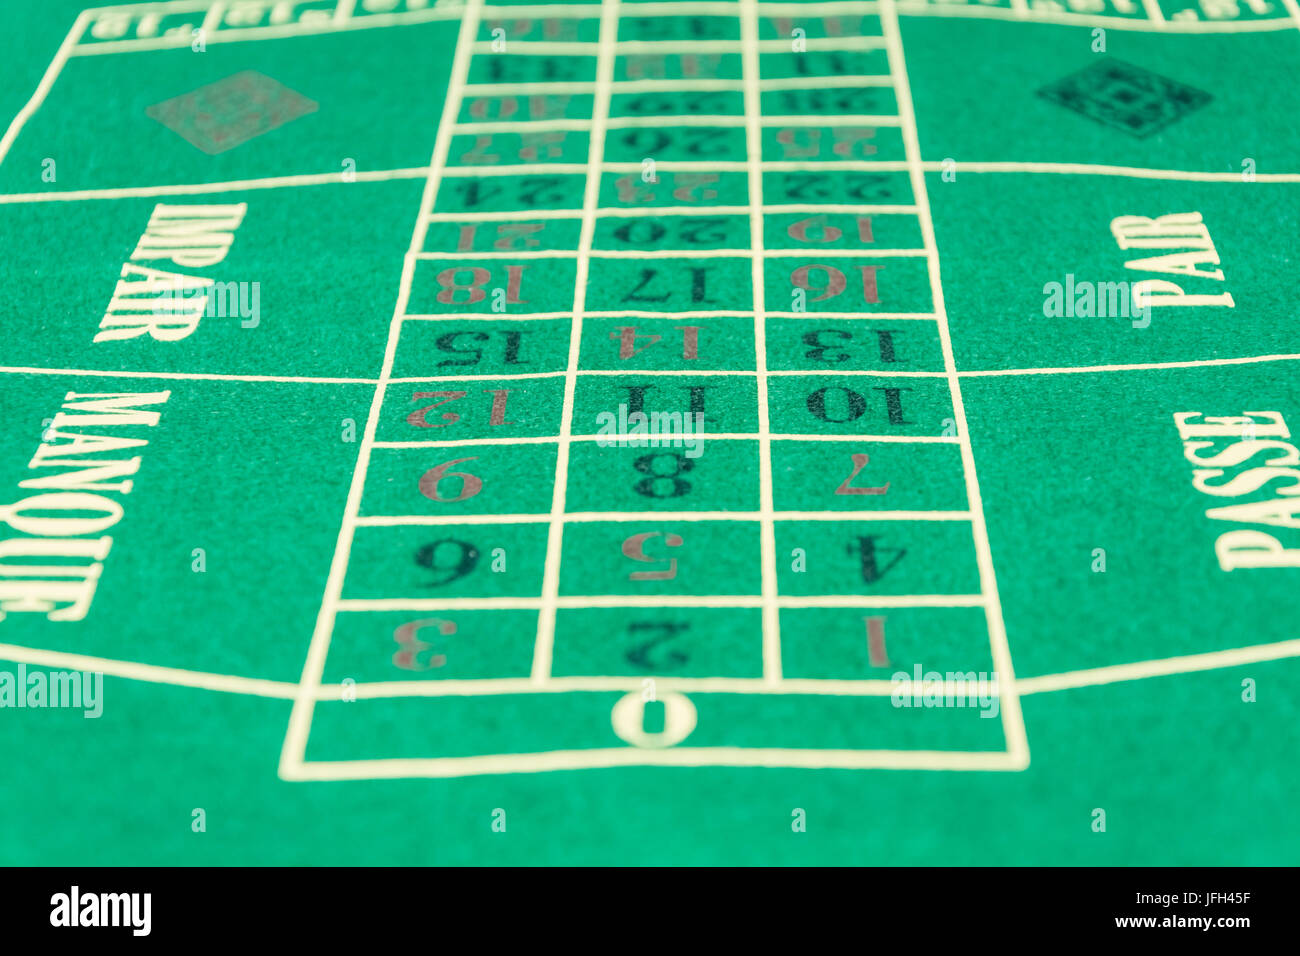 Roulette Layout Stockfoto